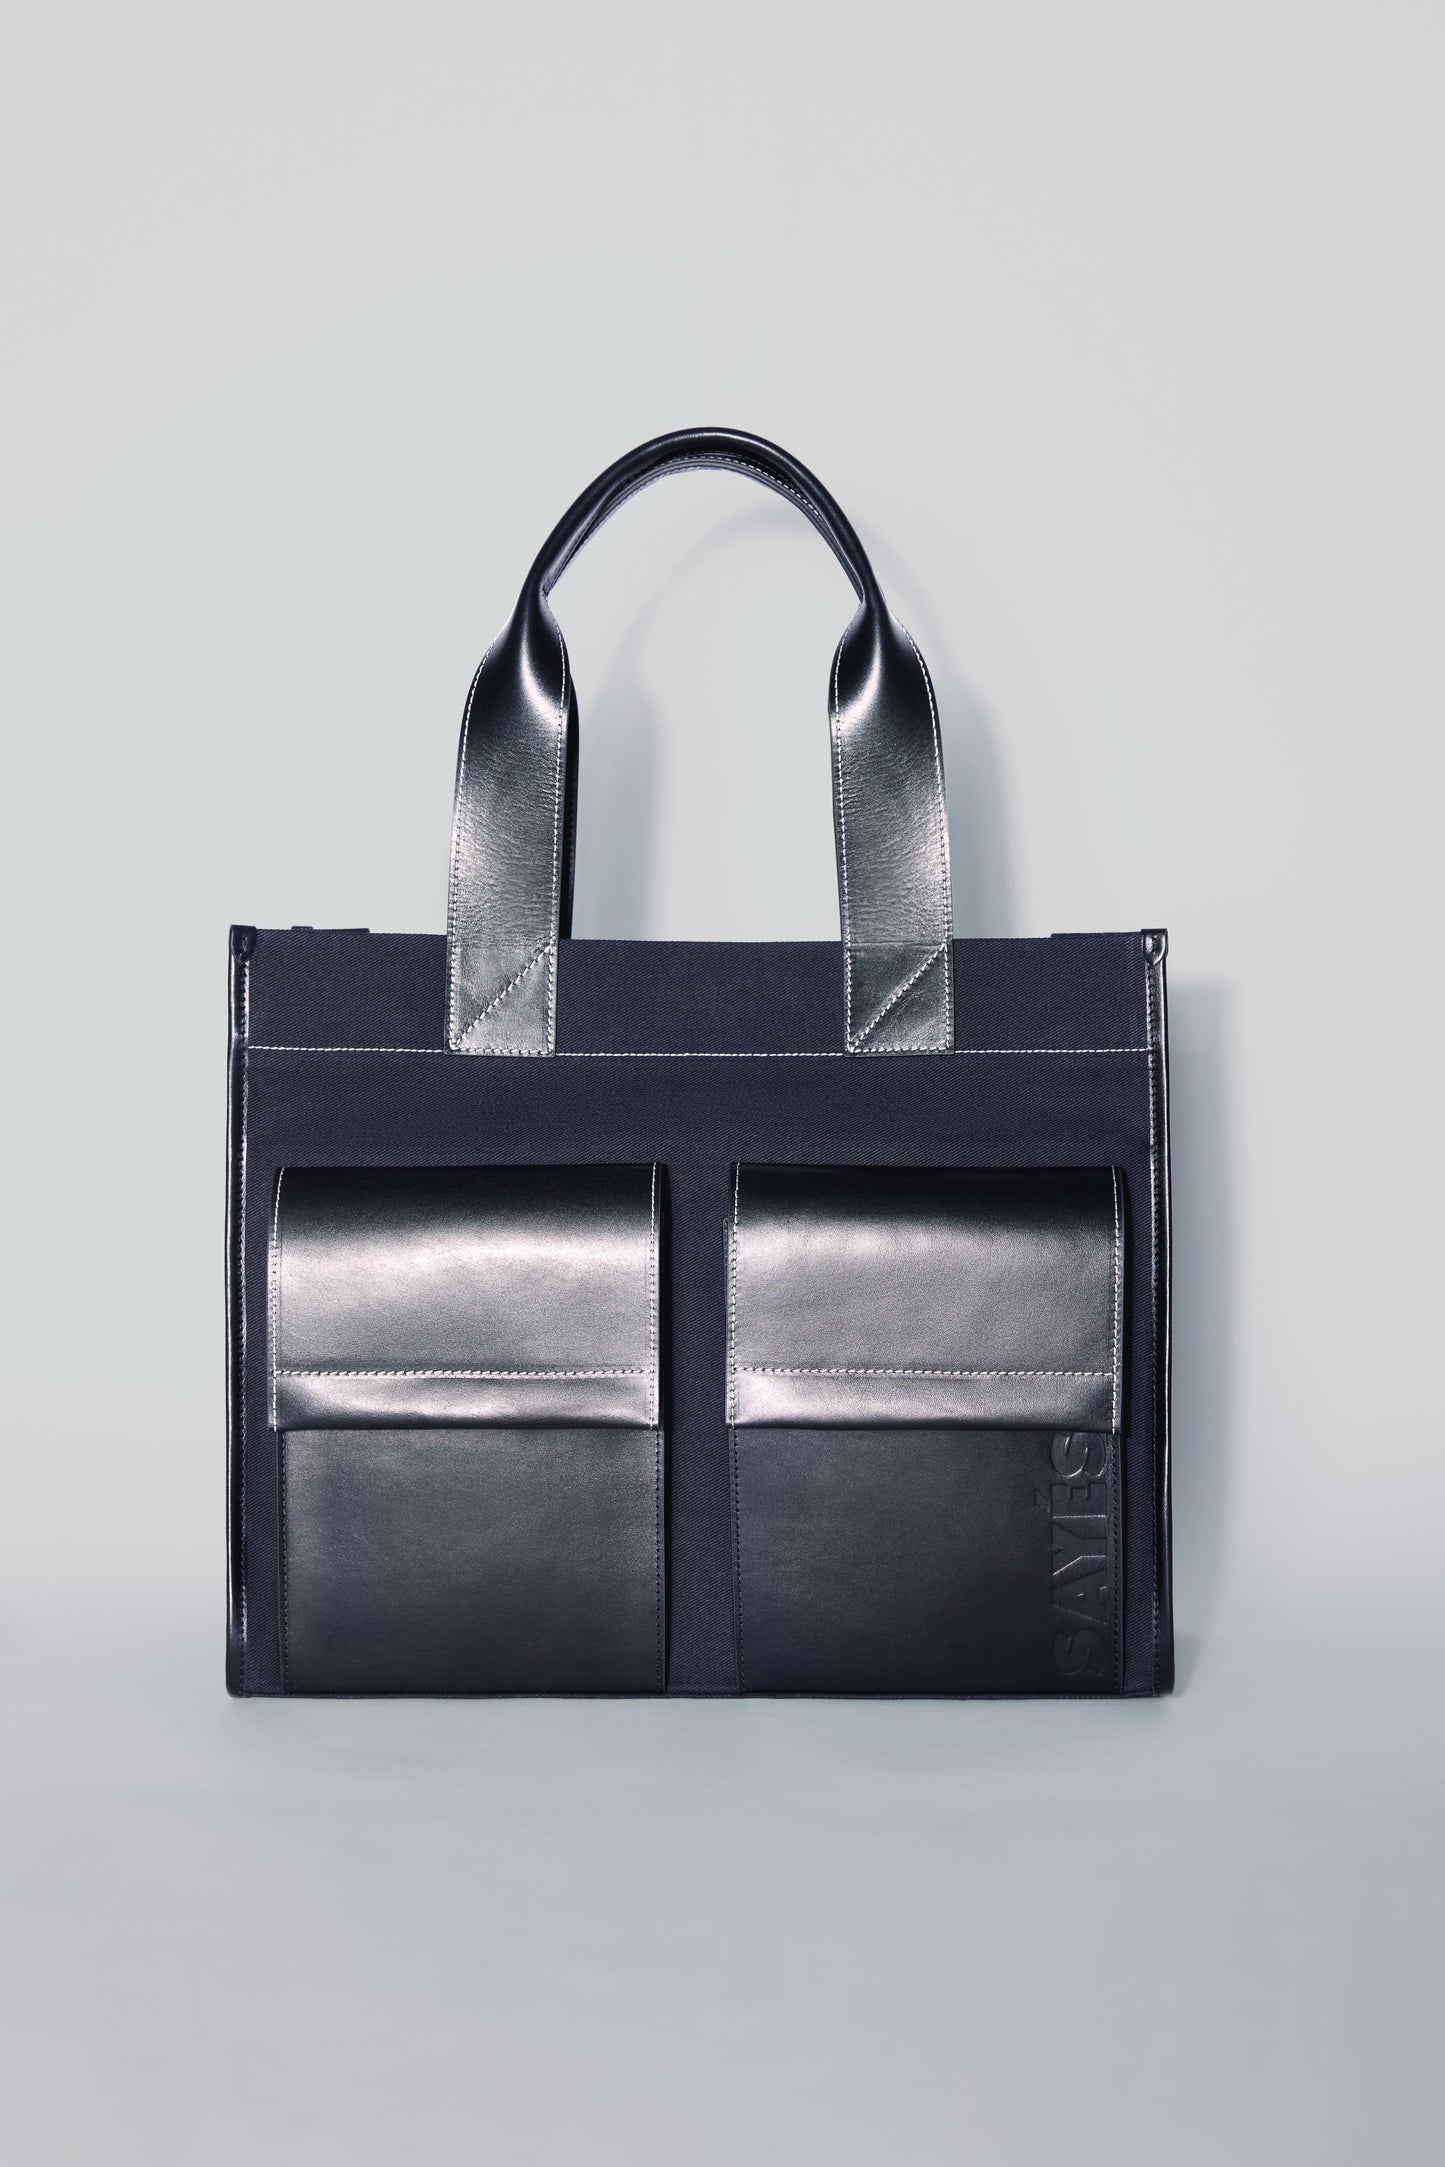 STITCHED POCKET MAXI TOTE IN NAVY AND BLACK